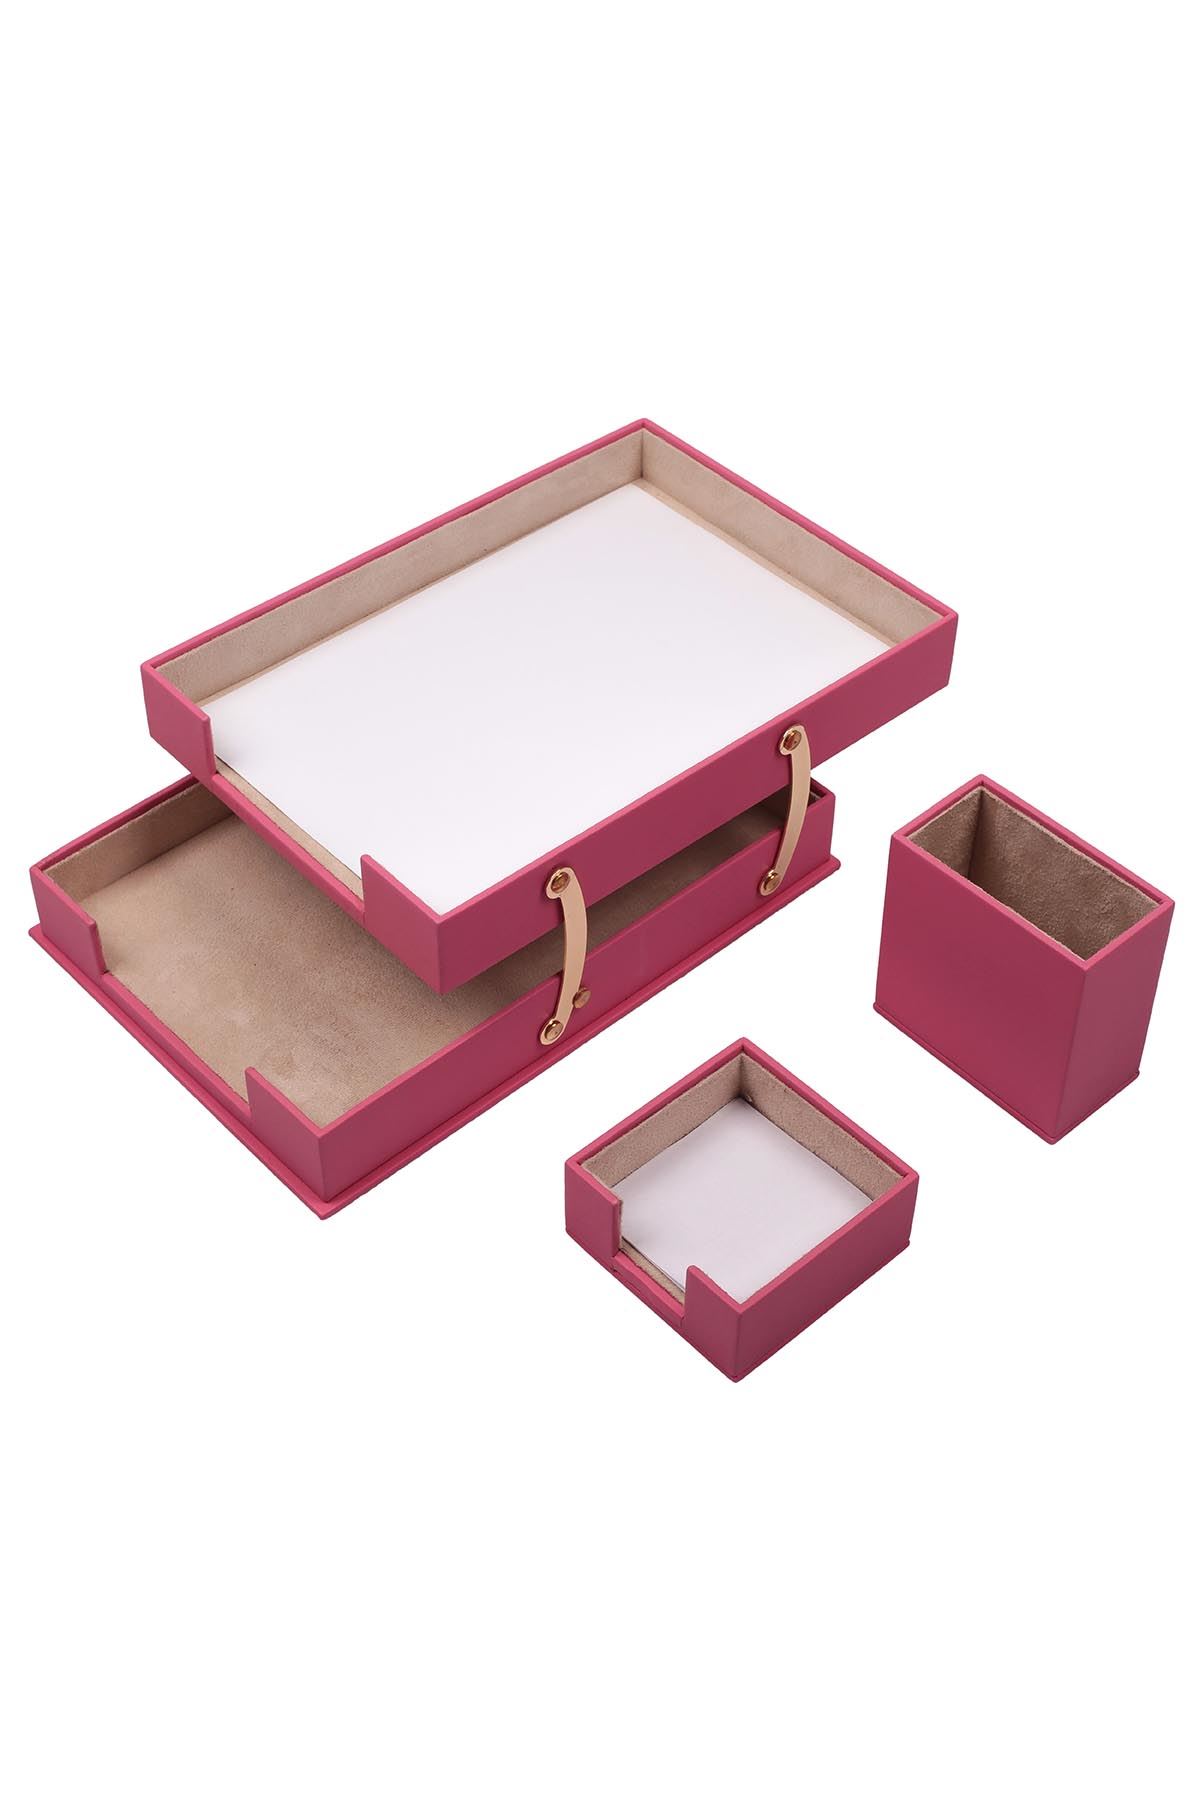 Double Document Tray With 2 Accessories Pink| Desk Set Accessories | Desktop Accessories | Desk Accessories | Desk Organizers